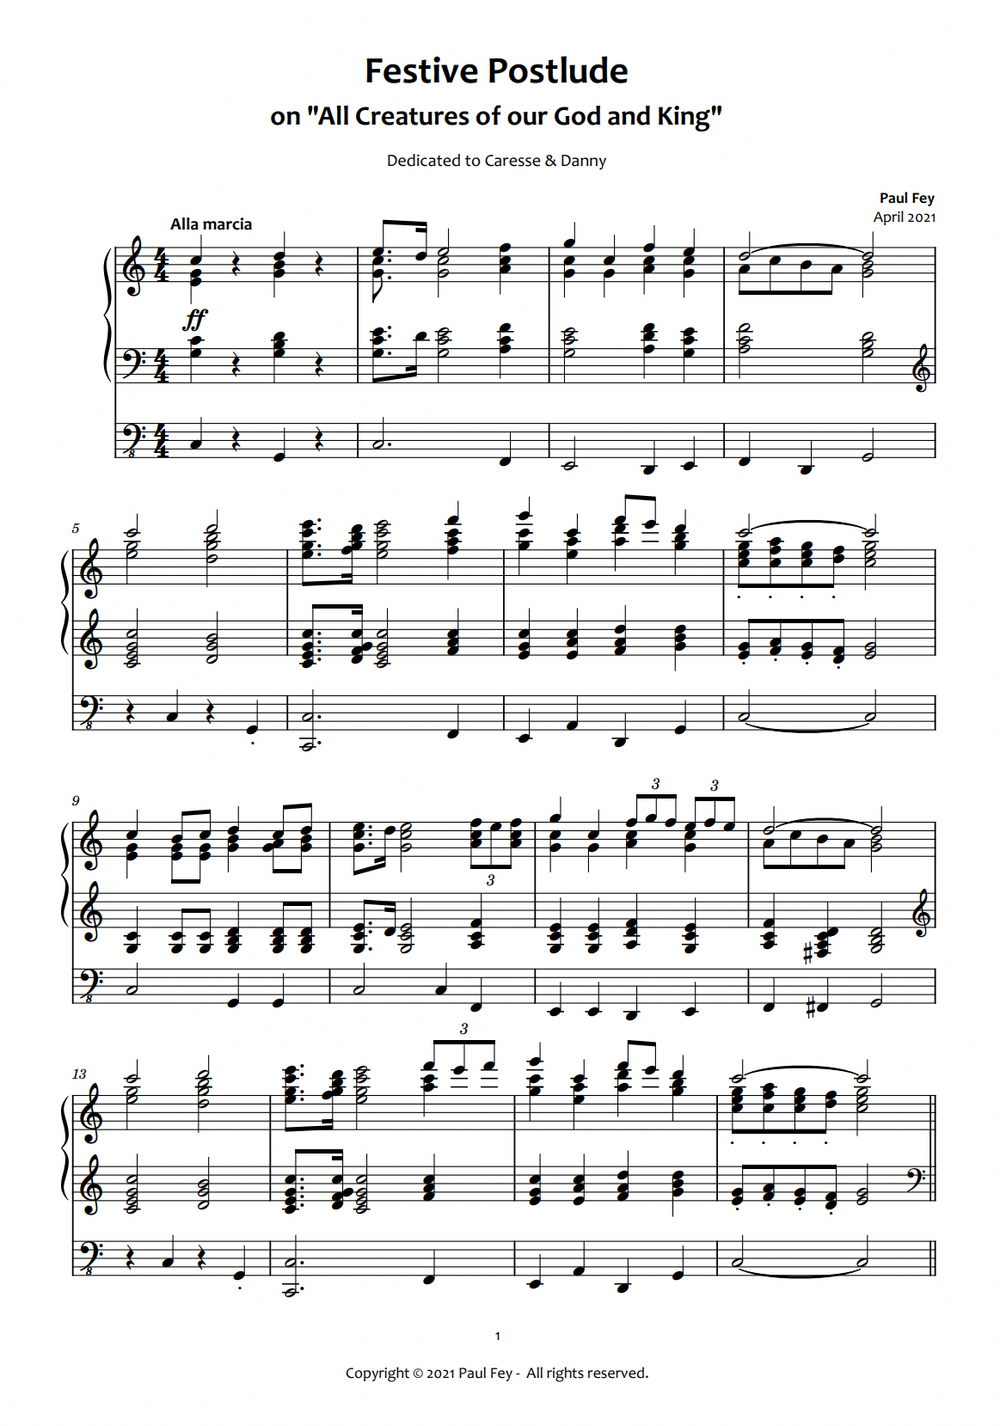 Festive Postlude on "All Creatures of Our God and King" (Sheet Music) - Music for Organ